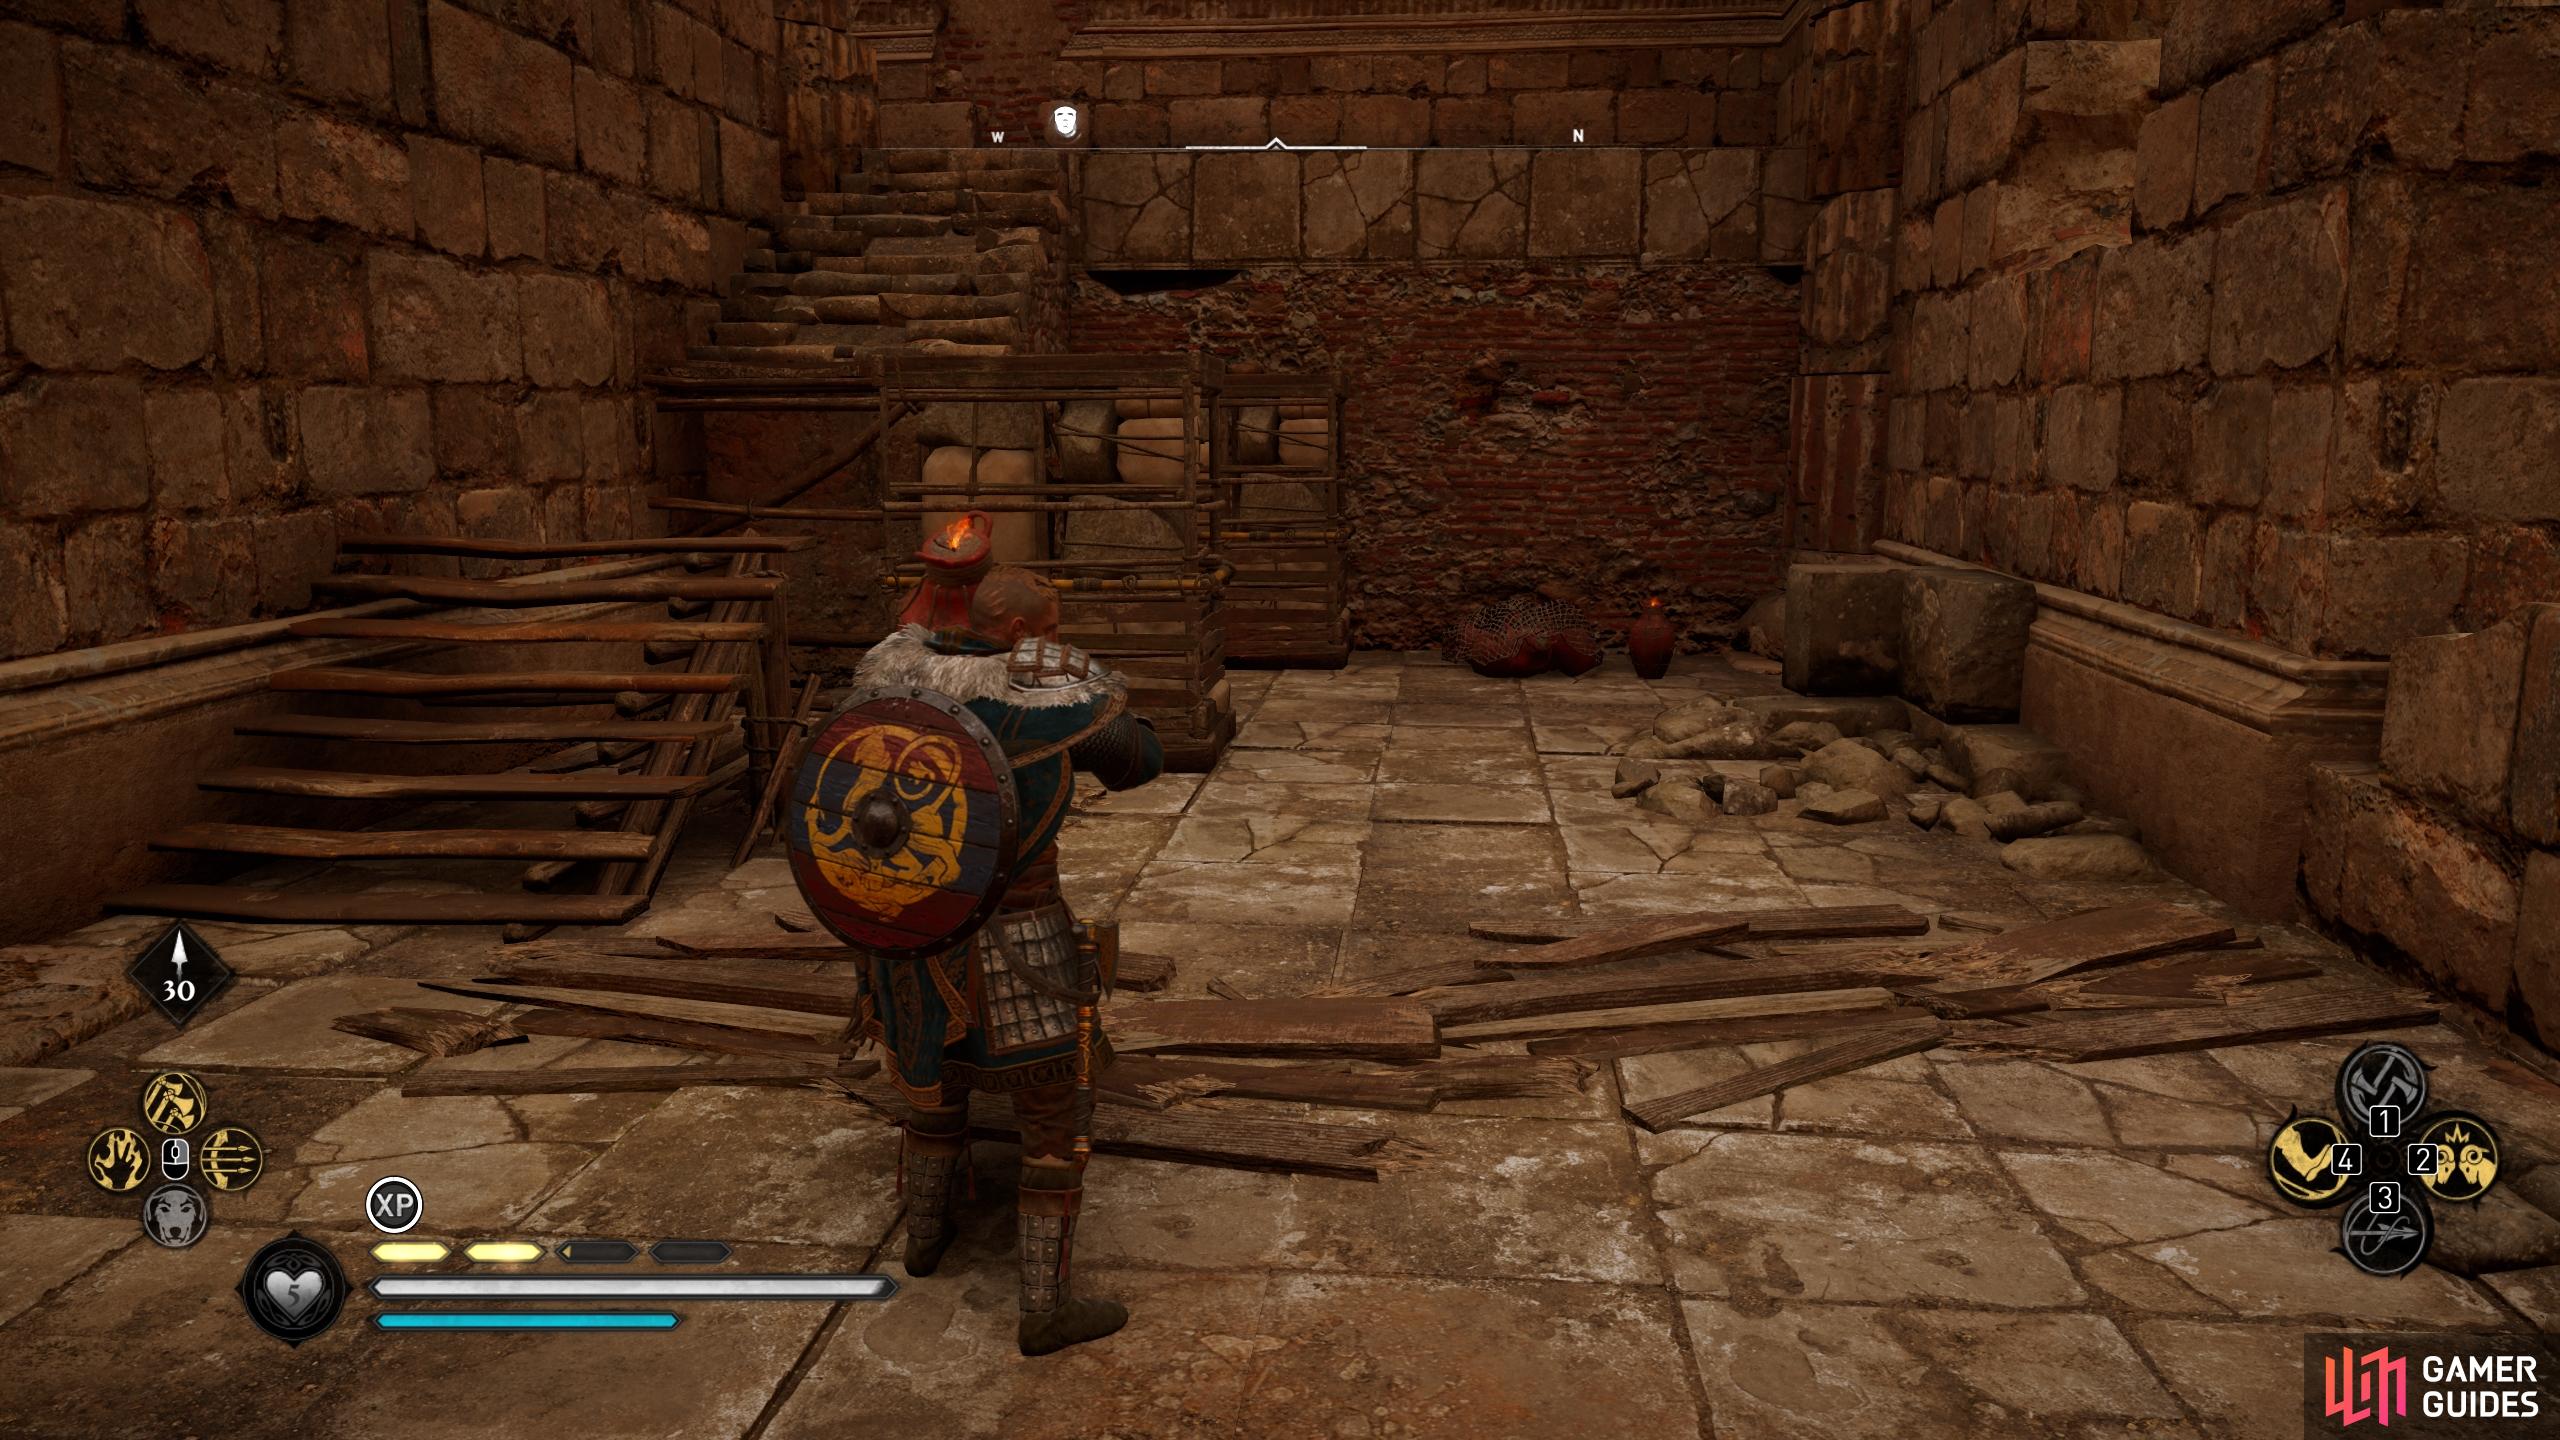 After moving the barricade between the steps, take a fire pot and place it on the blockade.